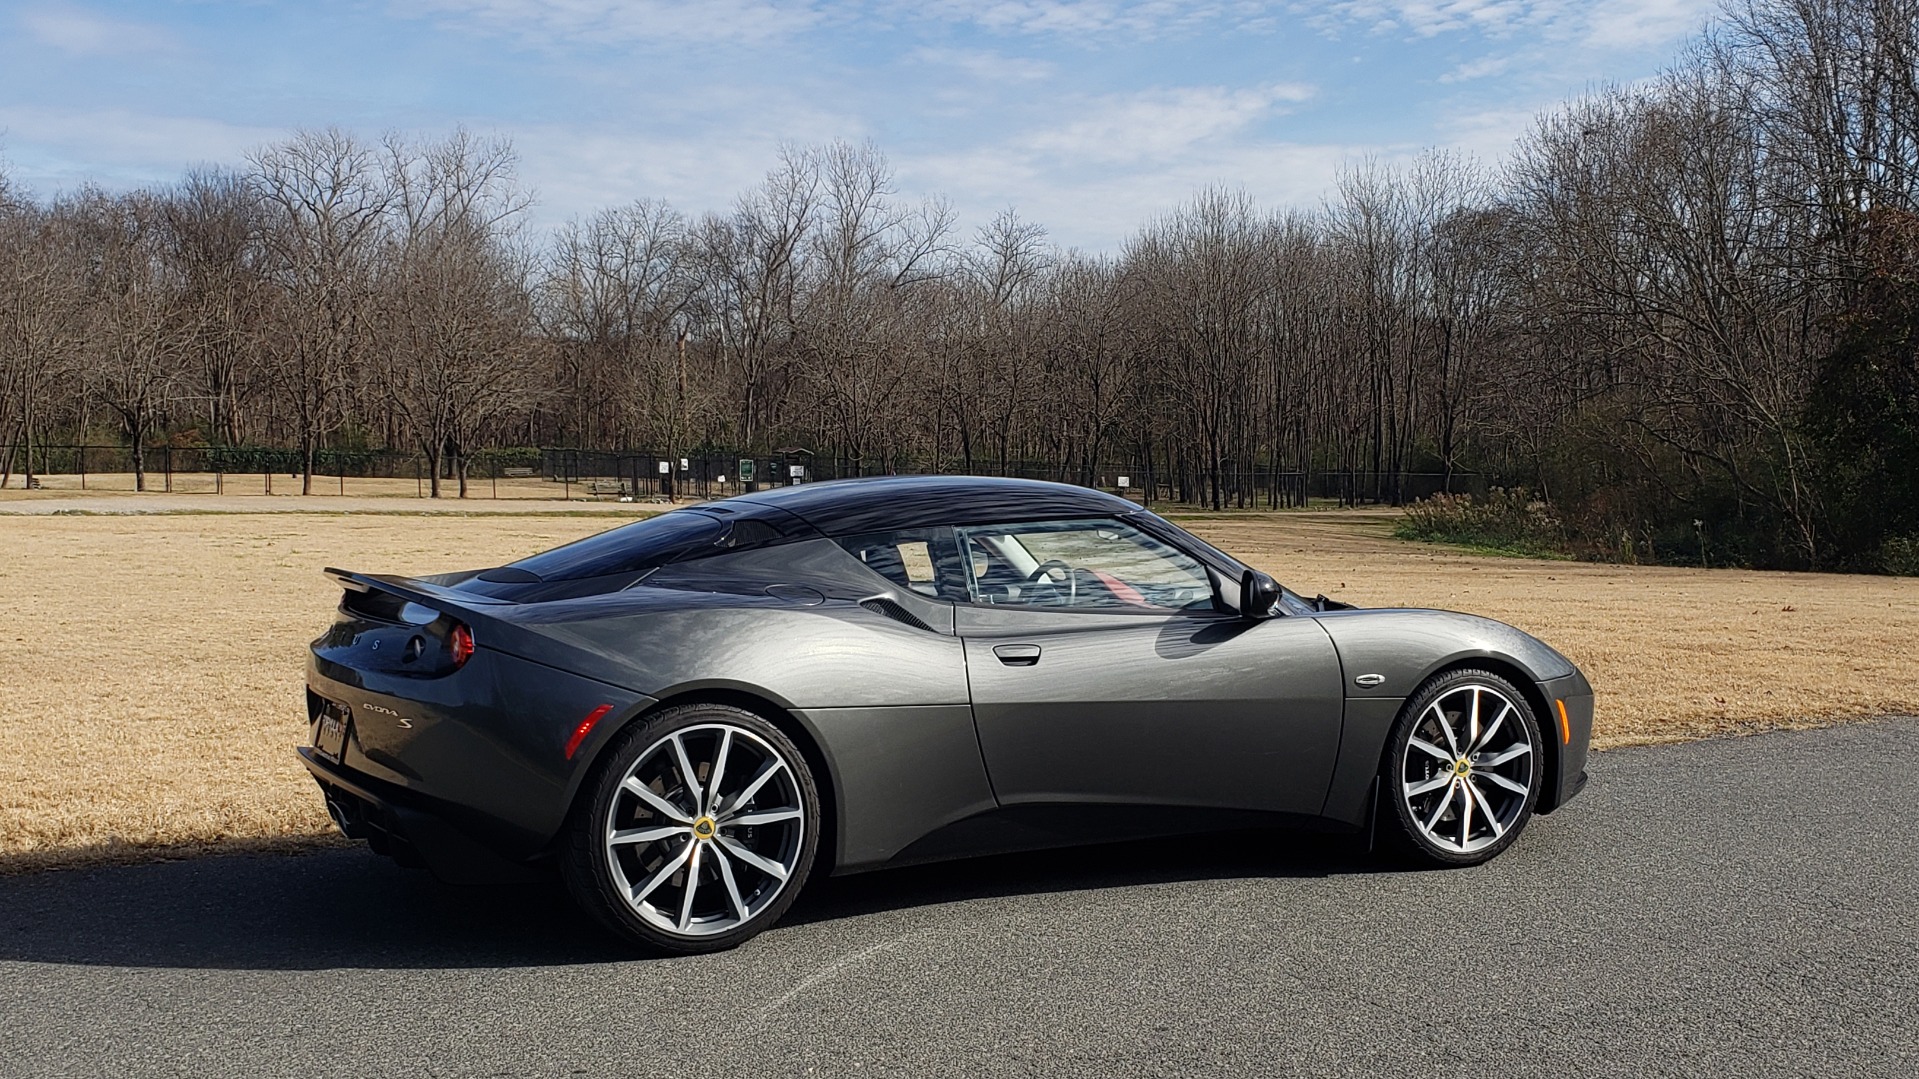 Used 2011 Lotus EVORA S 2+2 / 3.5L V6 / 6-SPD MANUAL / PIONEER / REARVIEW / LOW MILES for sale Sold at Formula Imports in Charlotte NC 28227 8